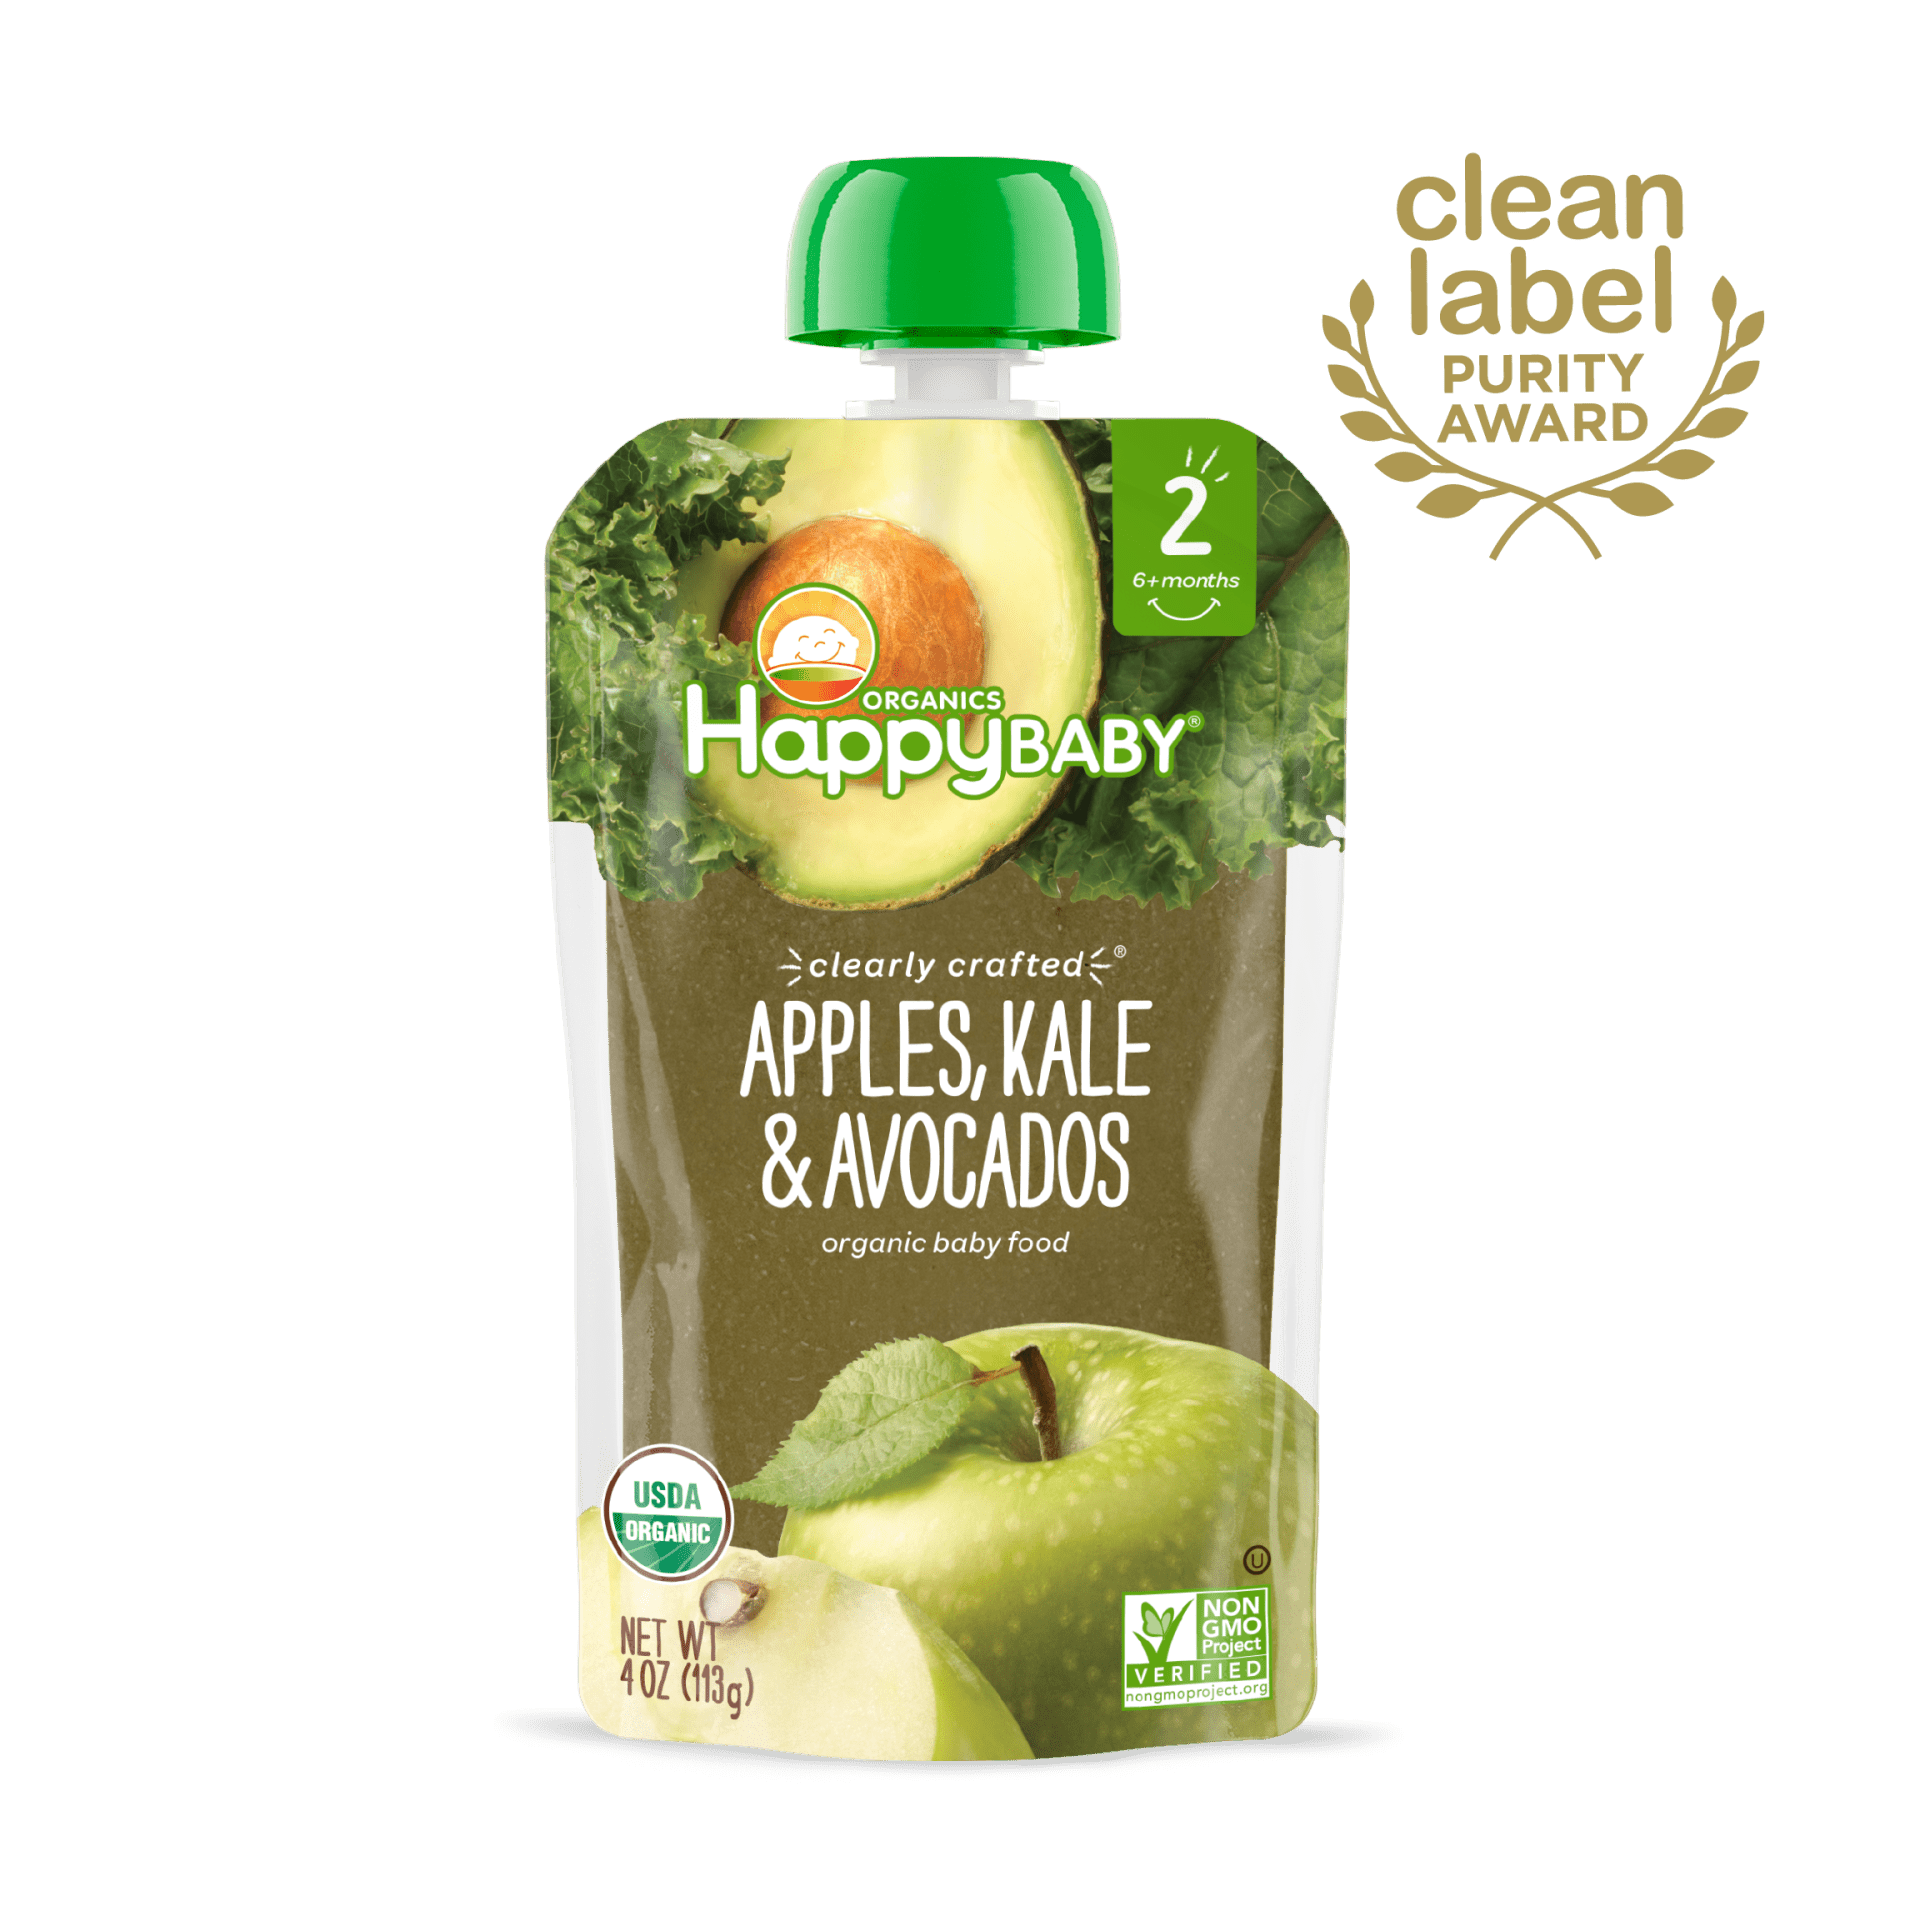 Happy Baby S1 - Clearly Crafted Apples, Kale & Avocados 3.5Oz pouch 16 units per case 3.5 oz